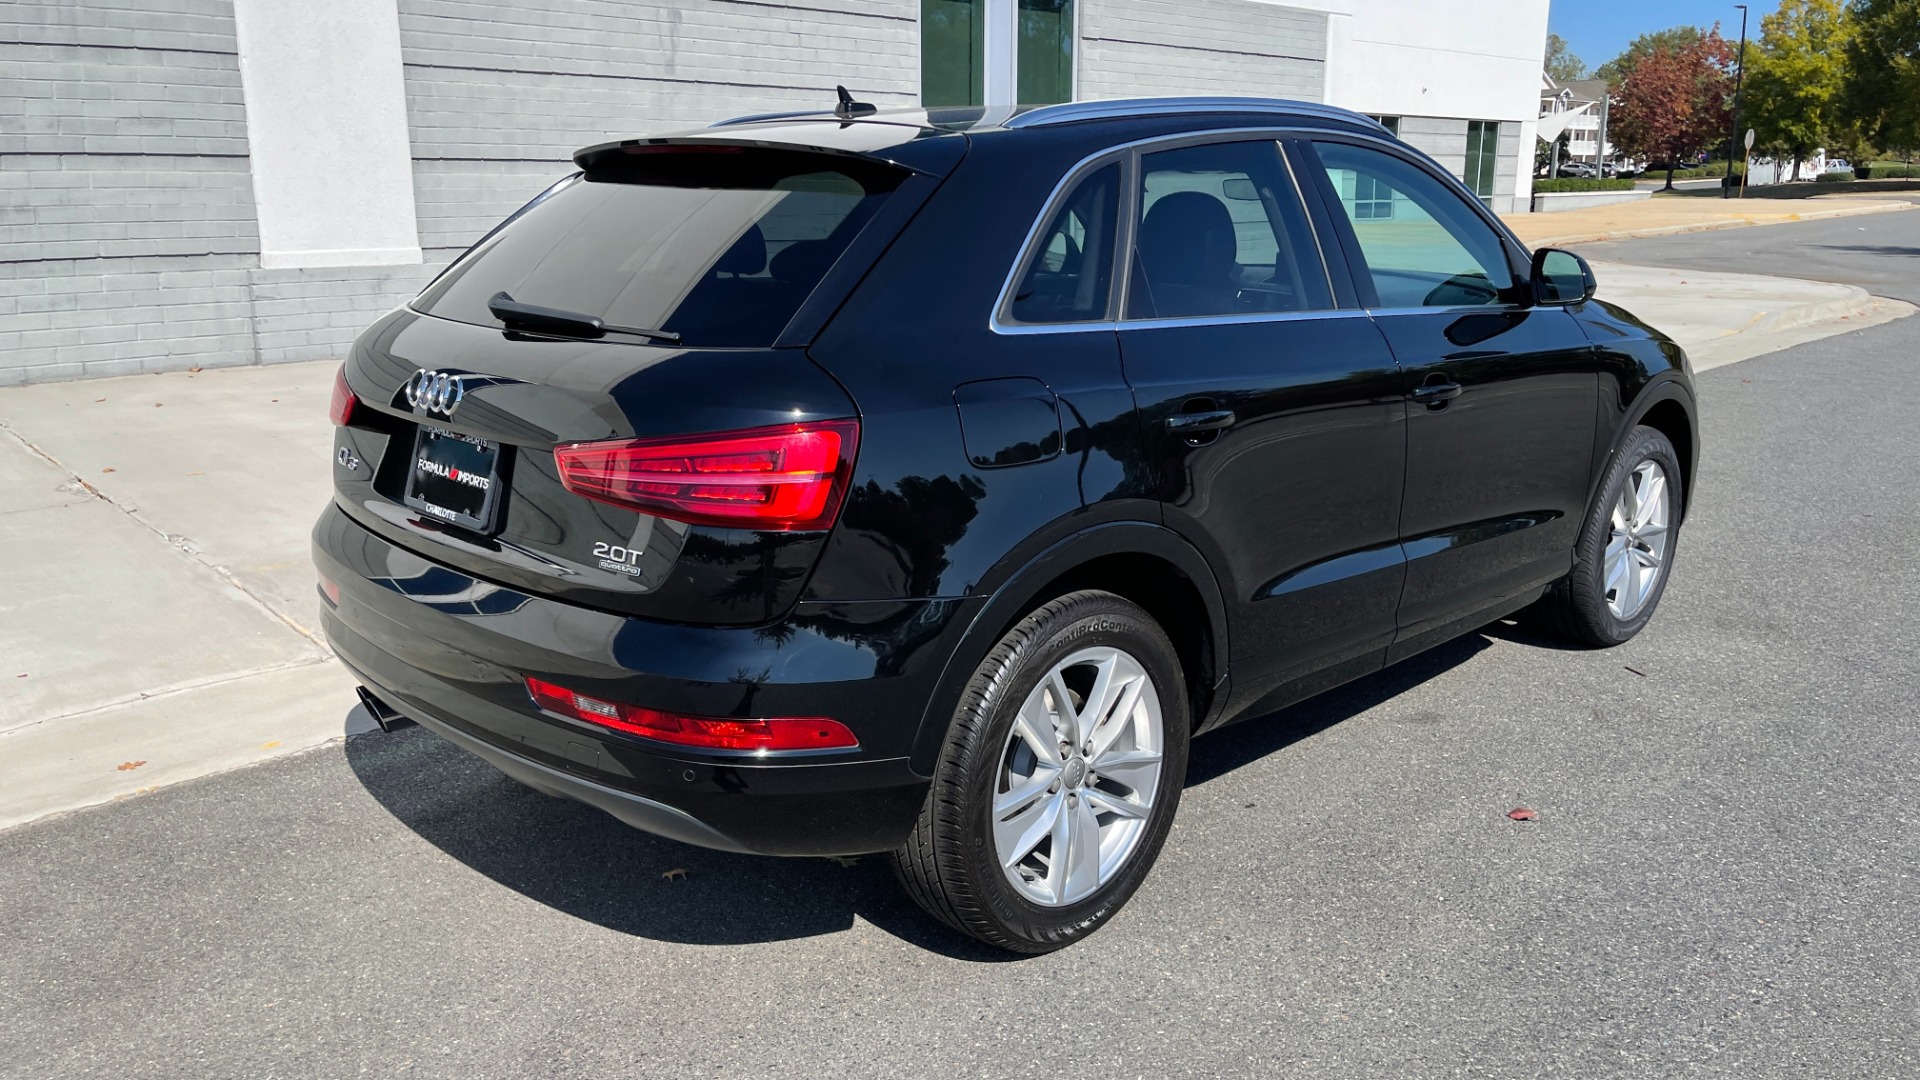 Used 2016 Audi Q3 PREMIUM PLUS / LEATHER / BACKUP CAMERA / HOMELINK / SIRIUS XM / AWD for sale $22,684 at Formula Imports in Charlotte NC 28227 7